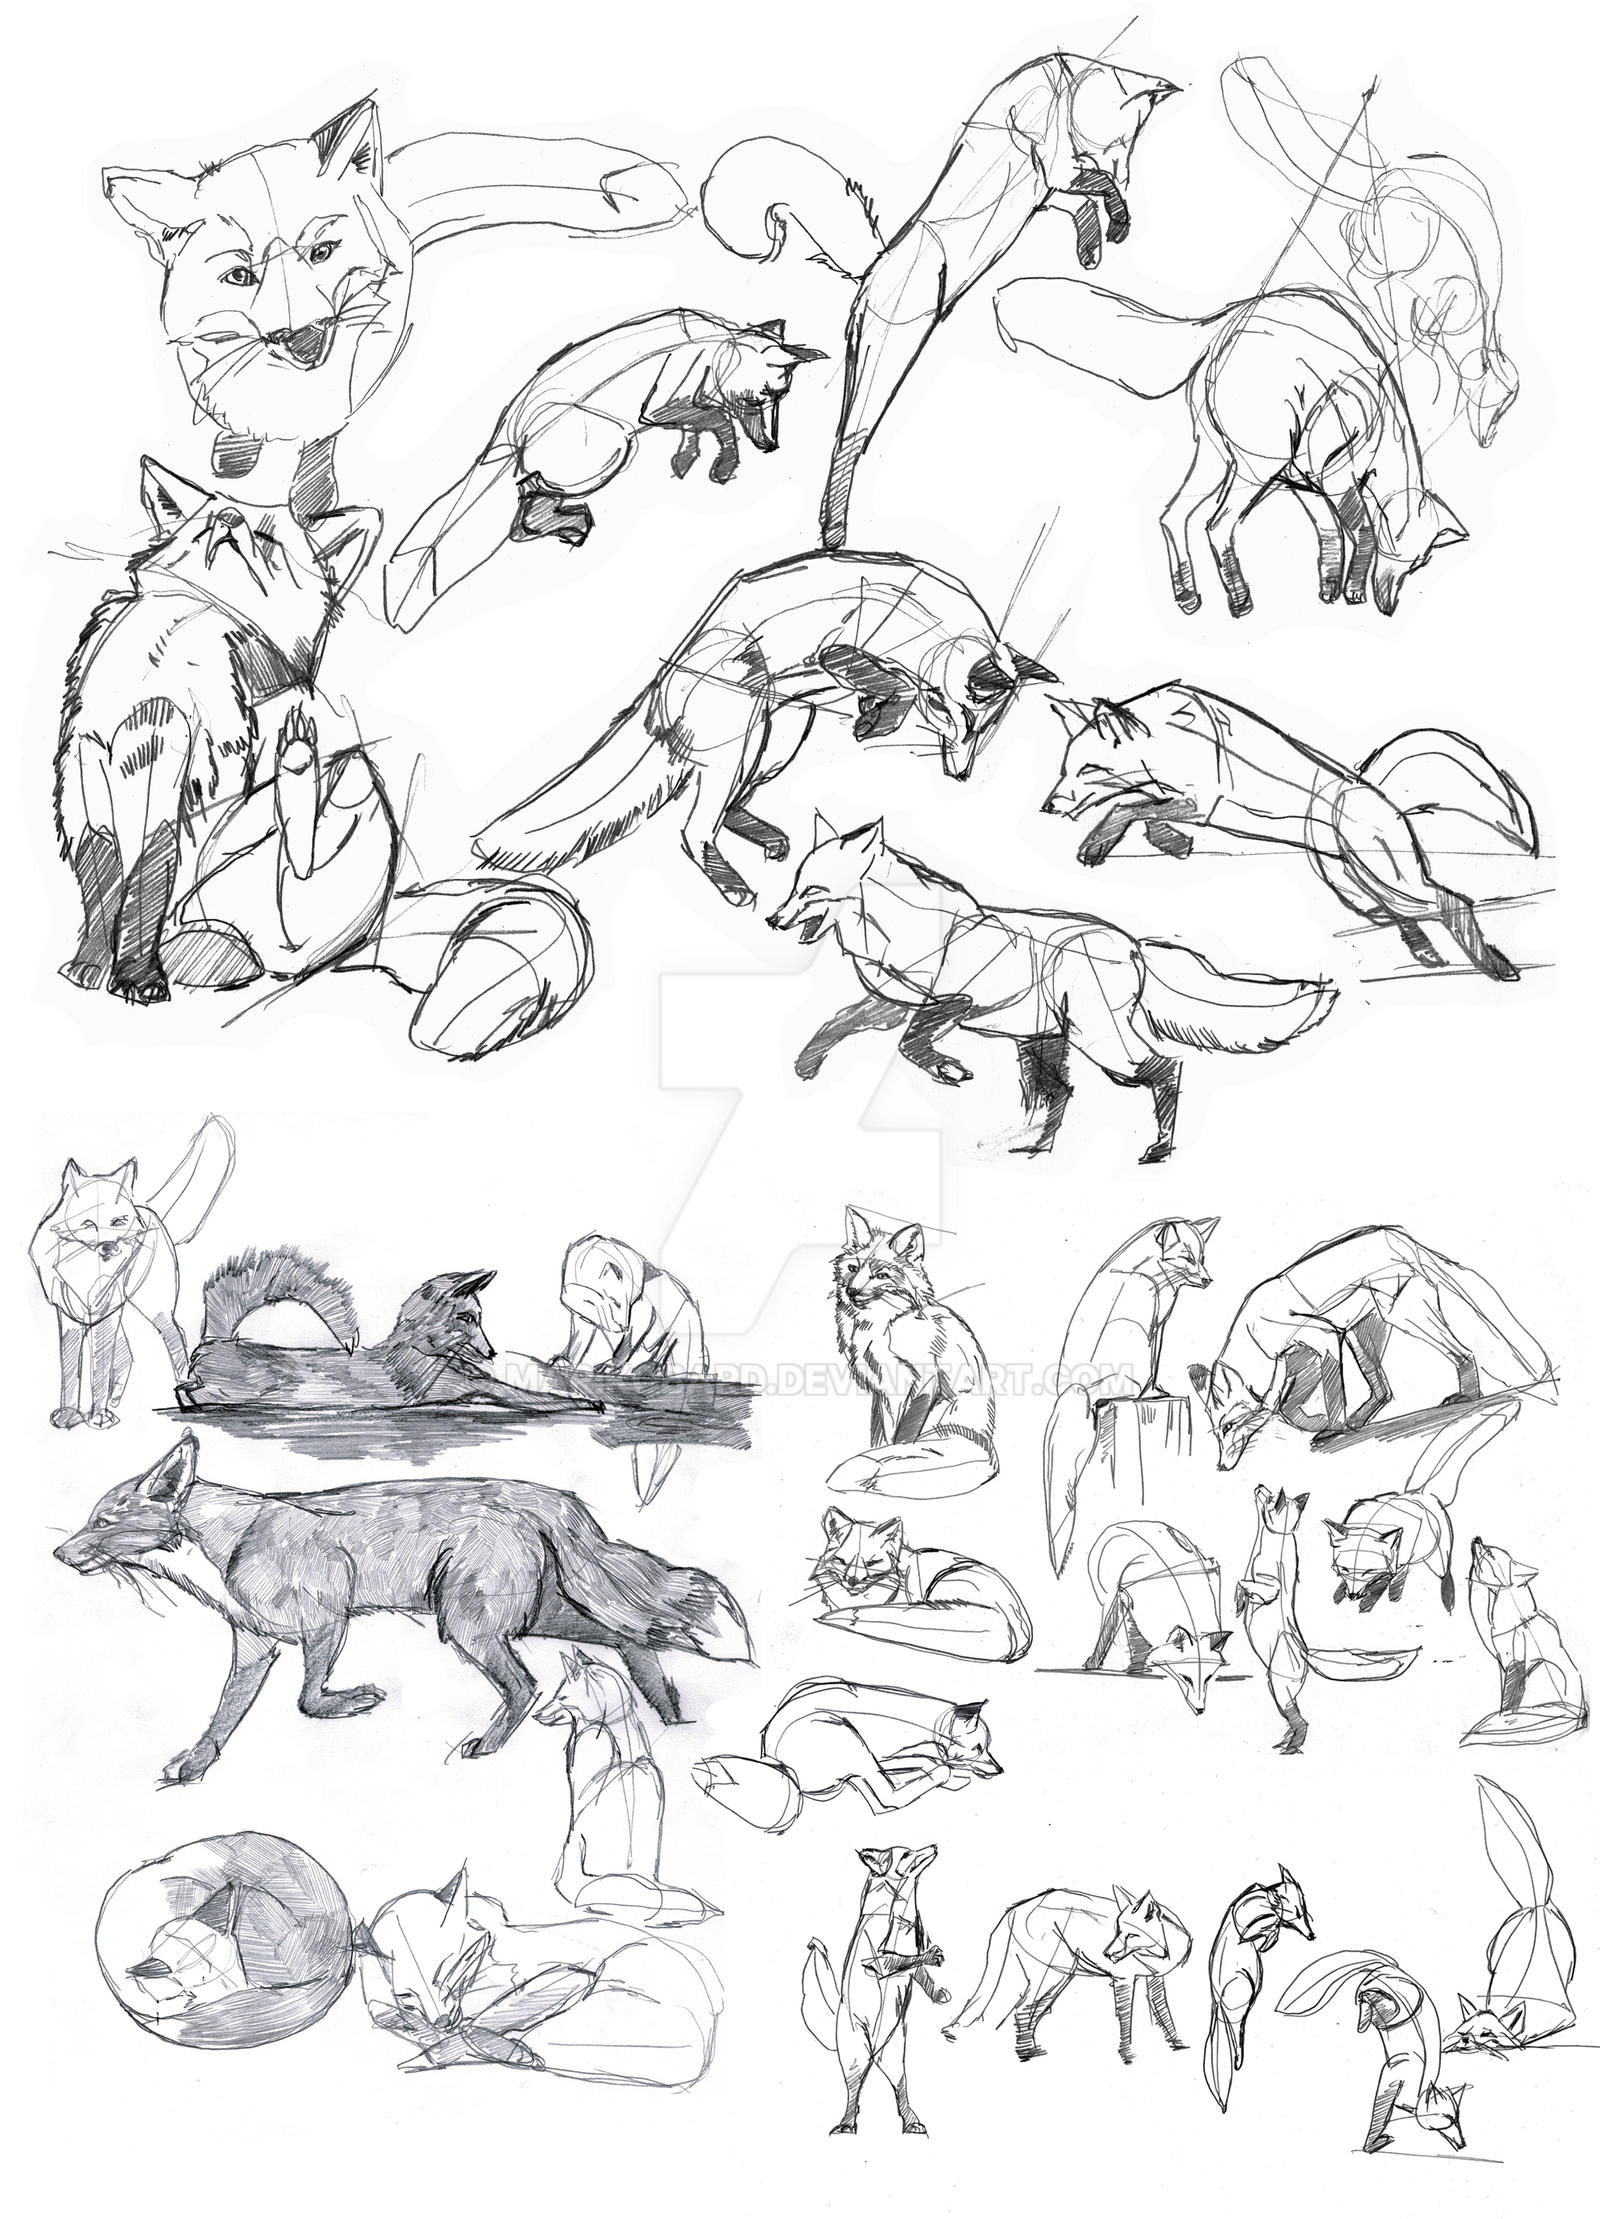 Pin by JI on Art and Ideas | Animal drawings, Animal sketches, Drawings